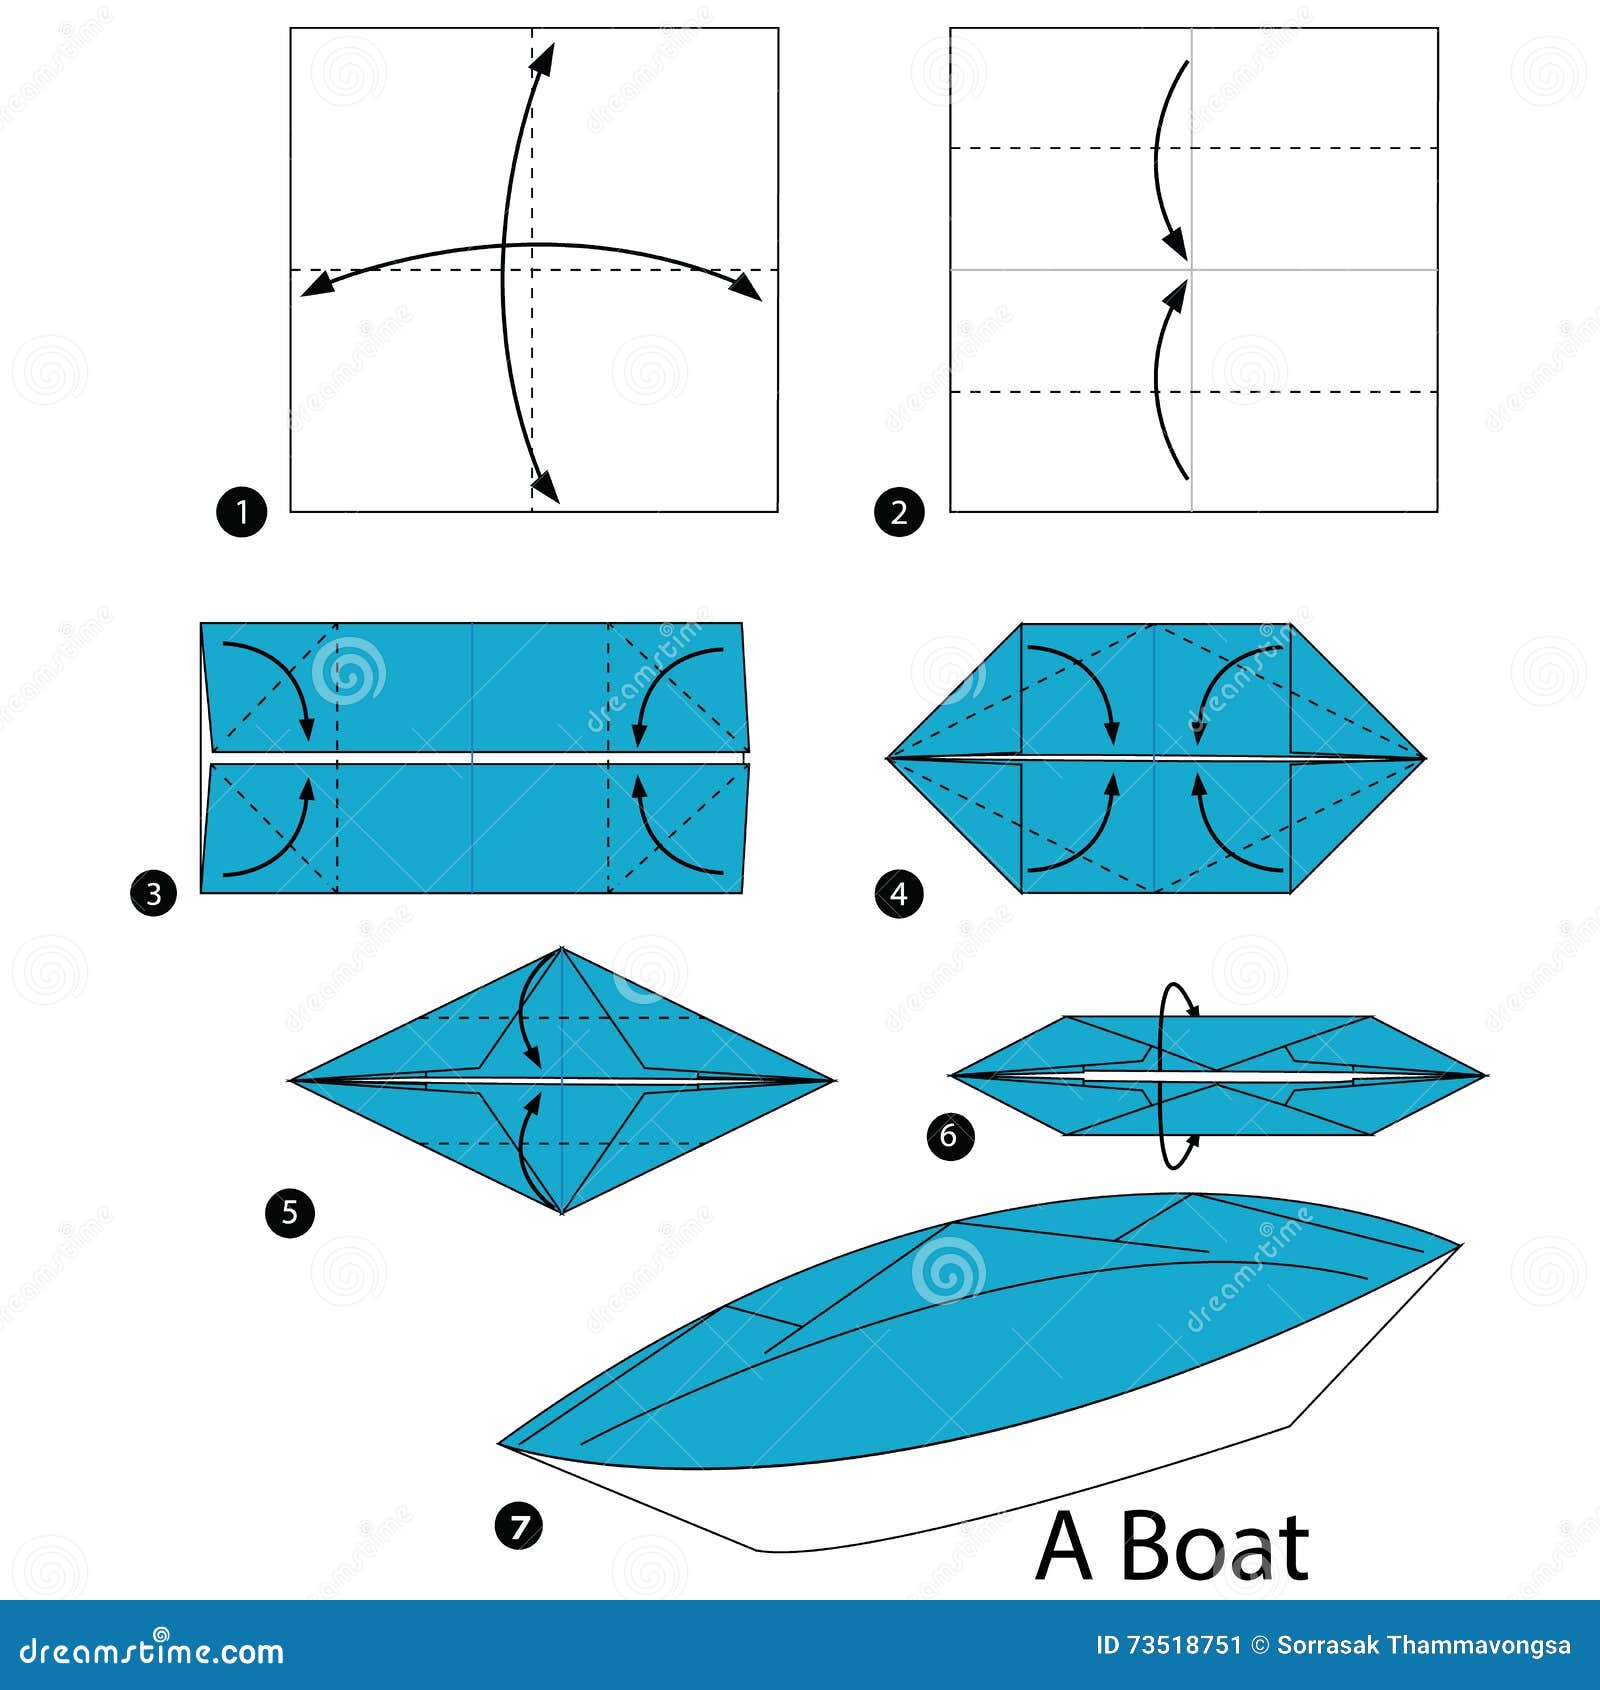 how to make a paper boat that floats in water - 28 images 